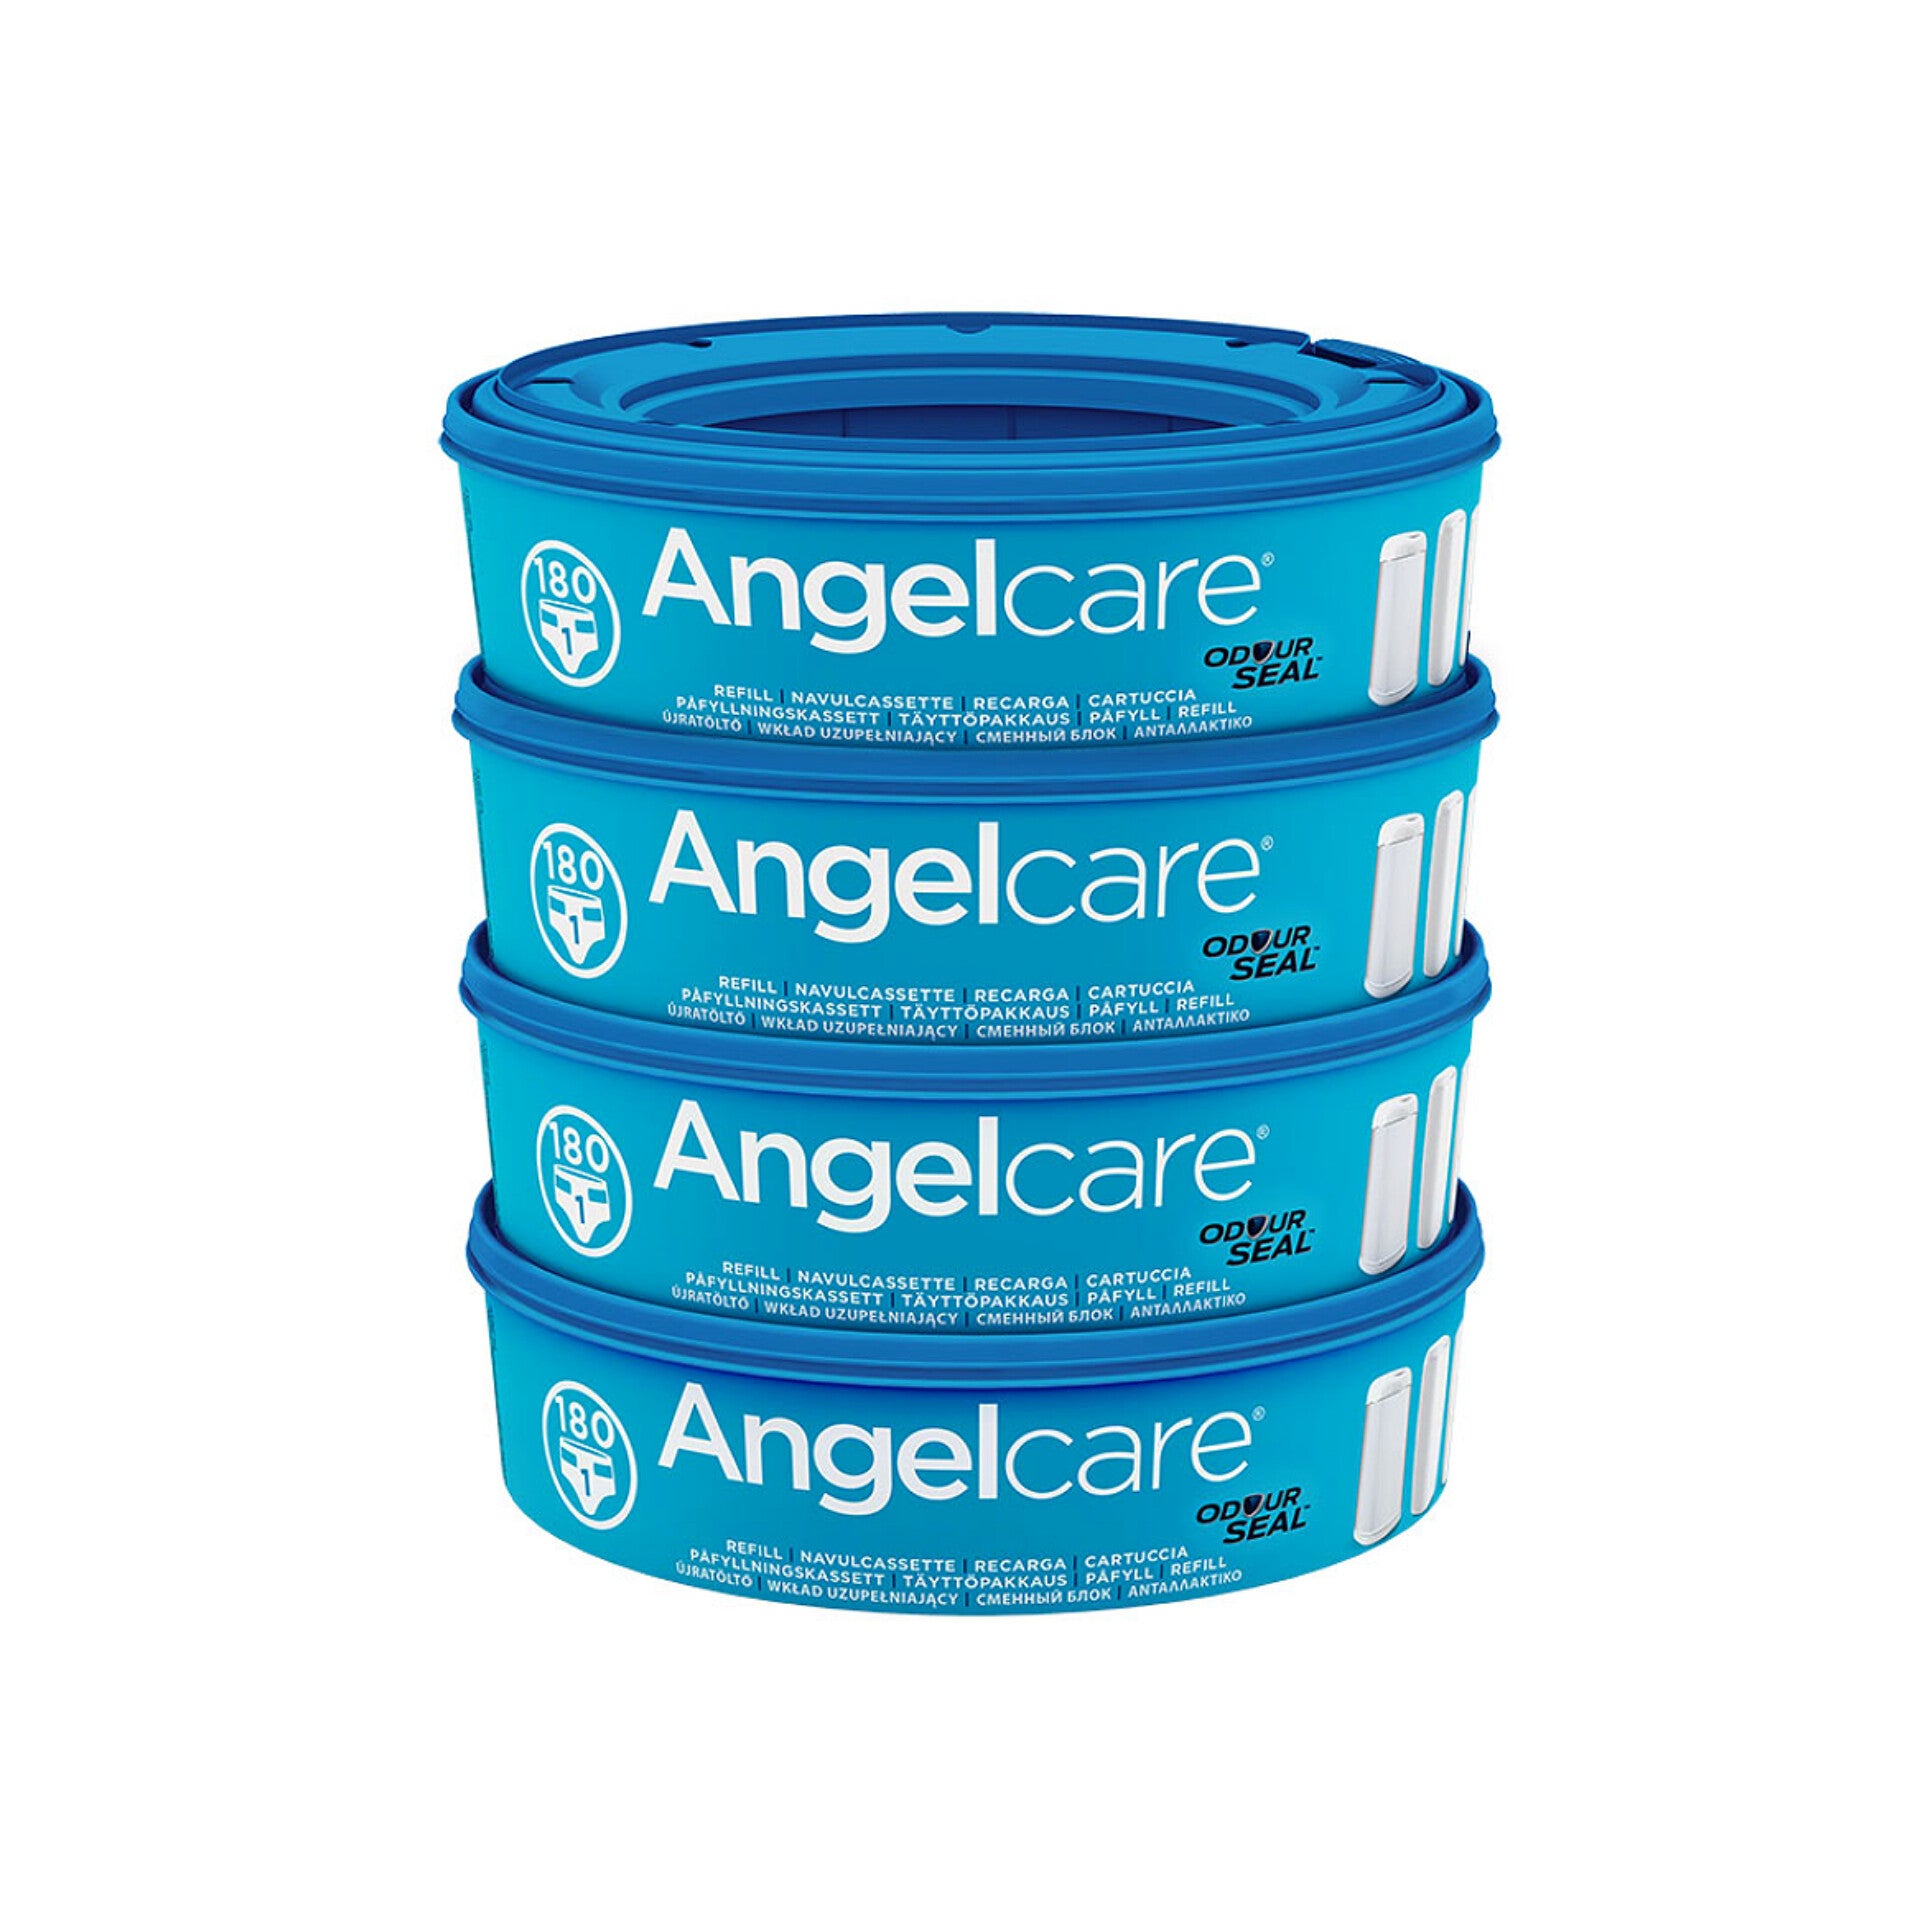 Angelcare Nappy Disposal System Refill Cassettes - Diaper Yard Gh